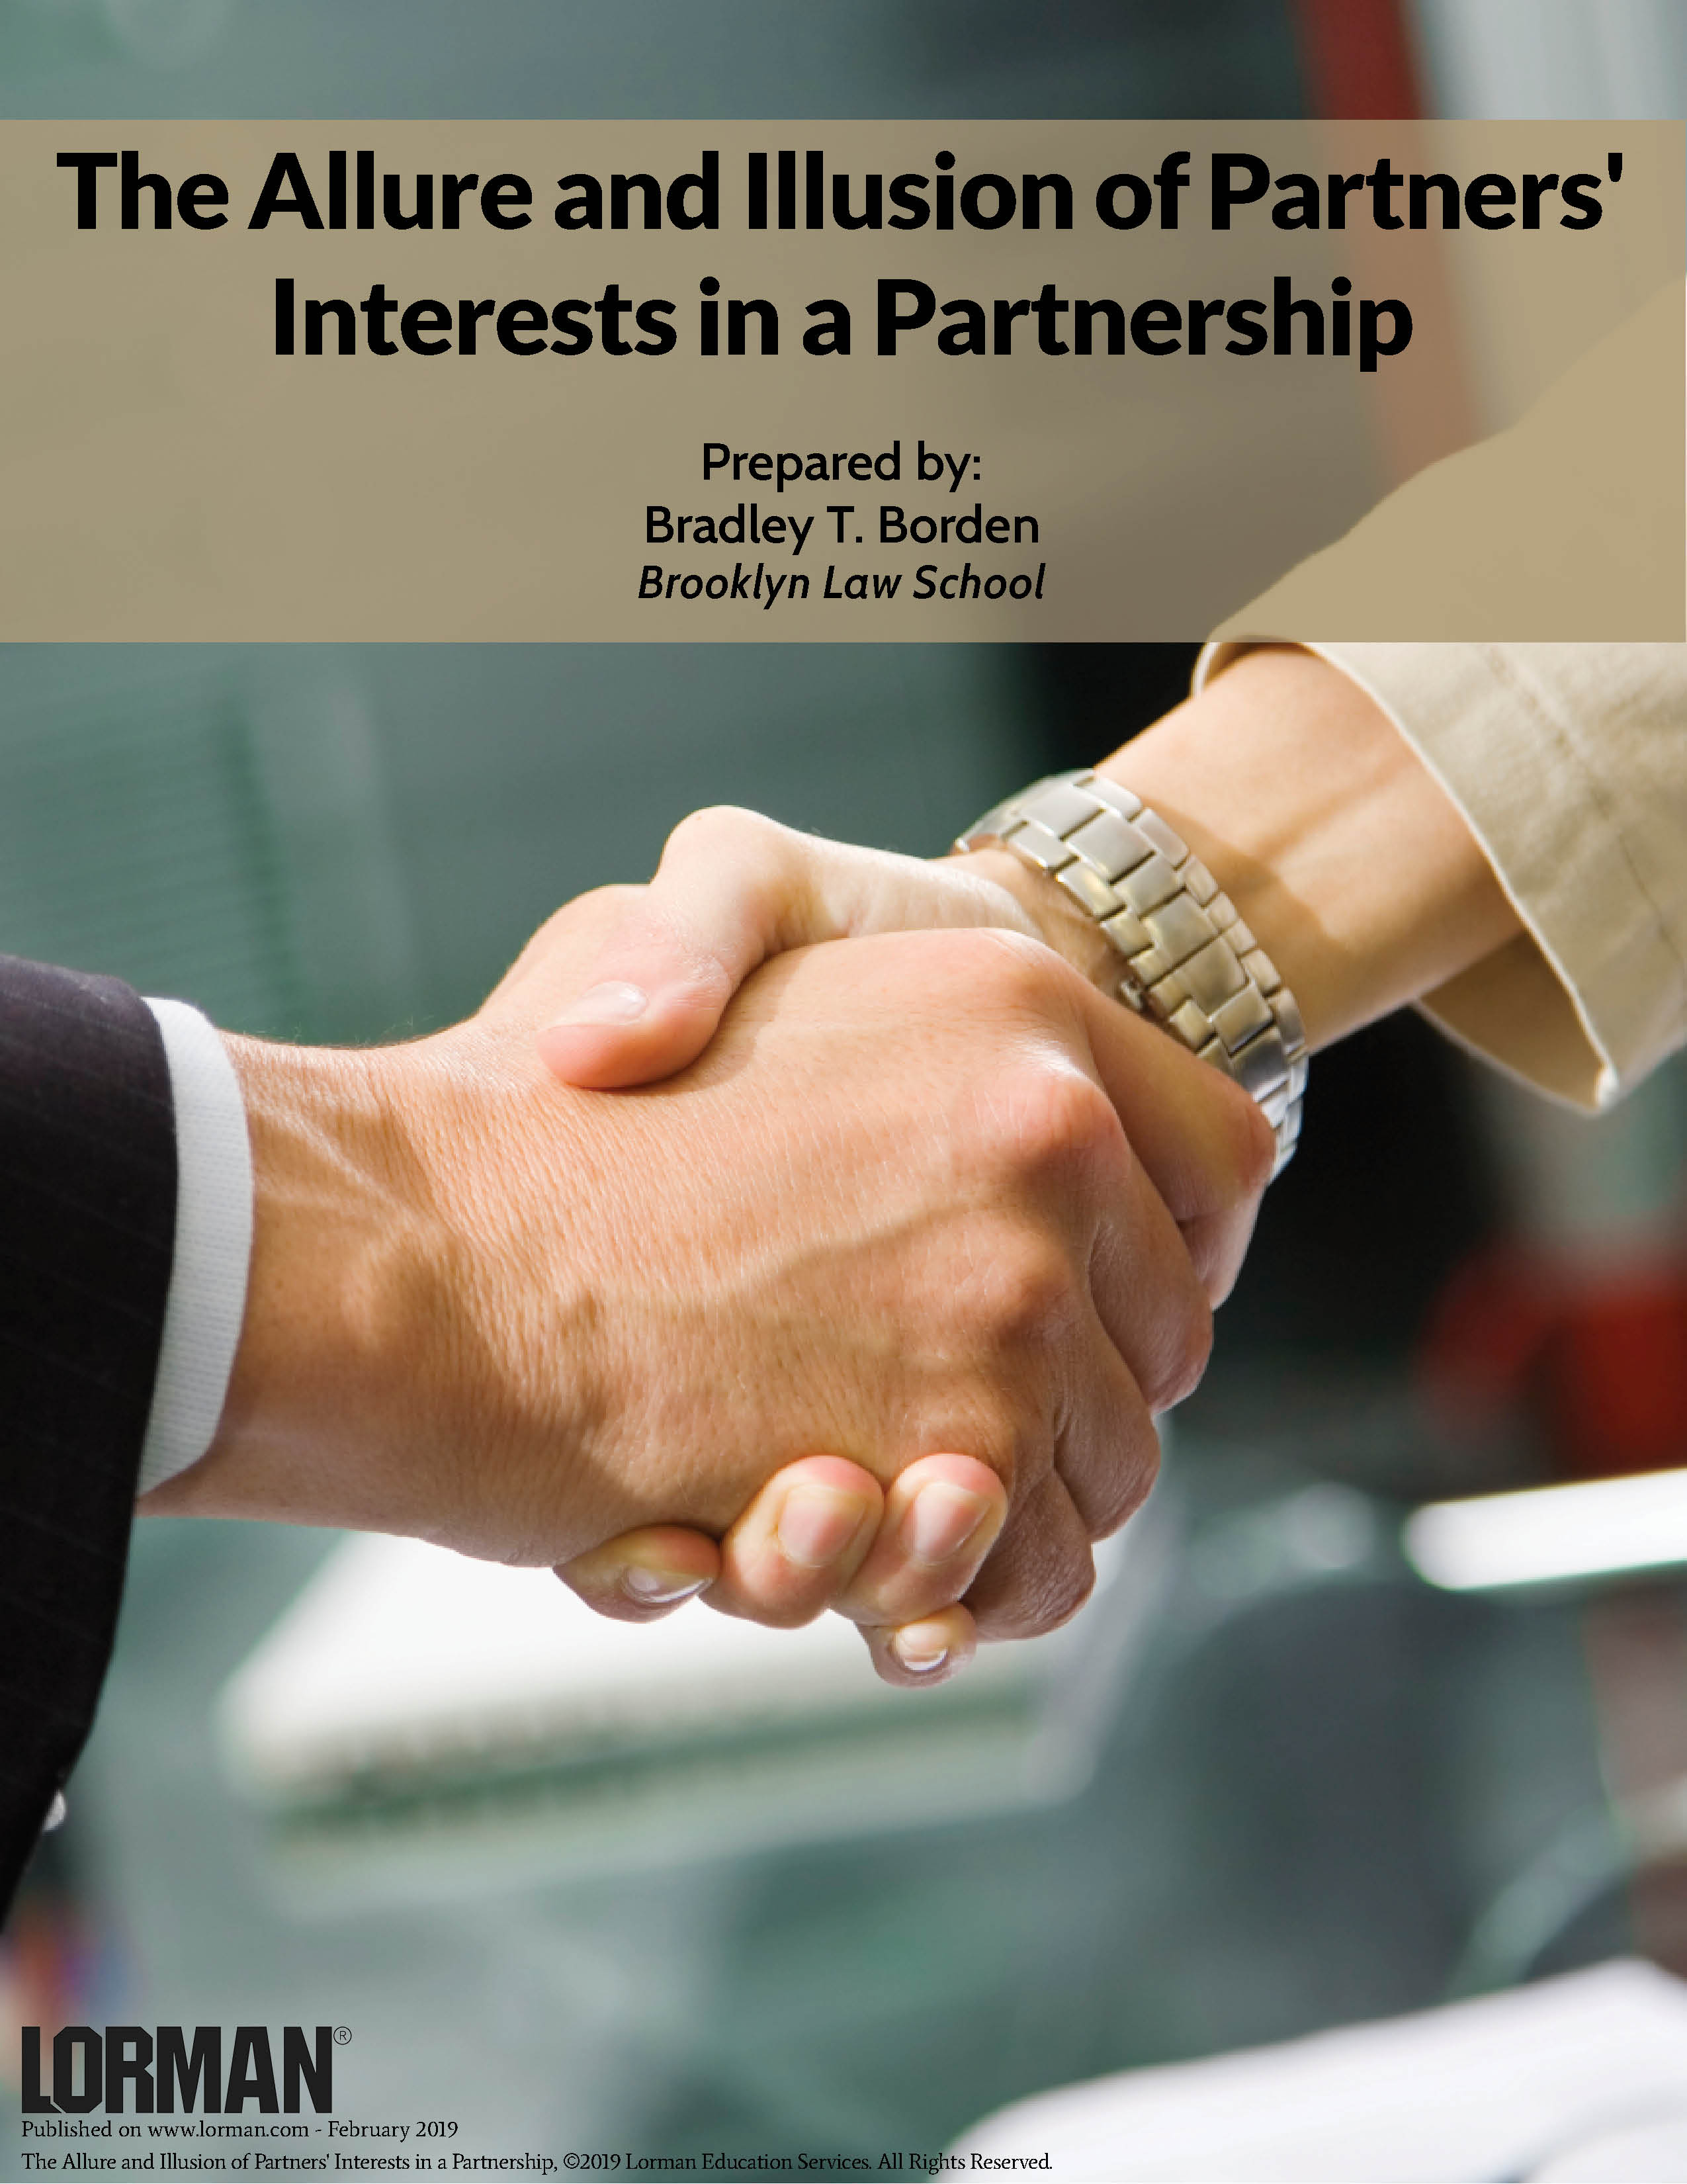 The Allure and Illusion of Partners' Interests in a Partnership